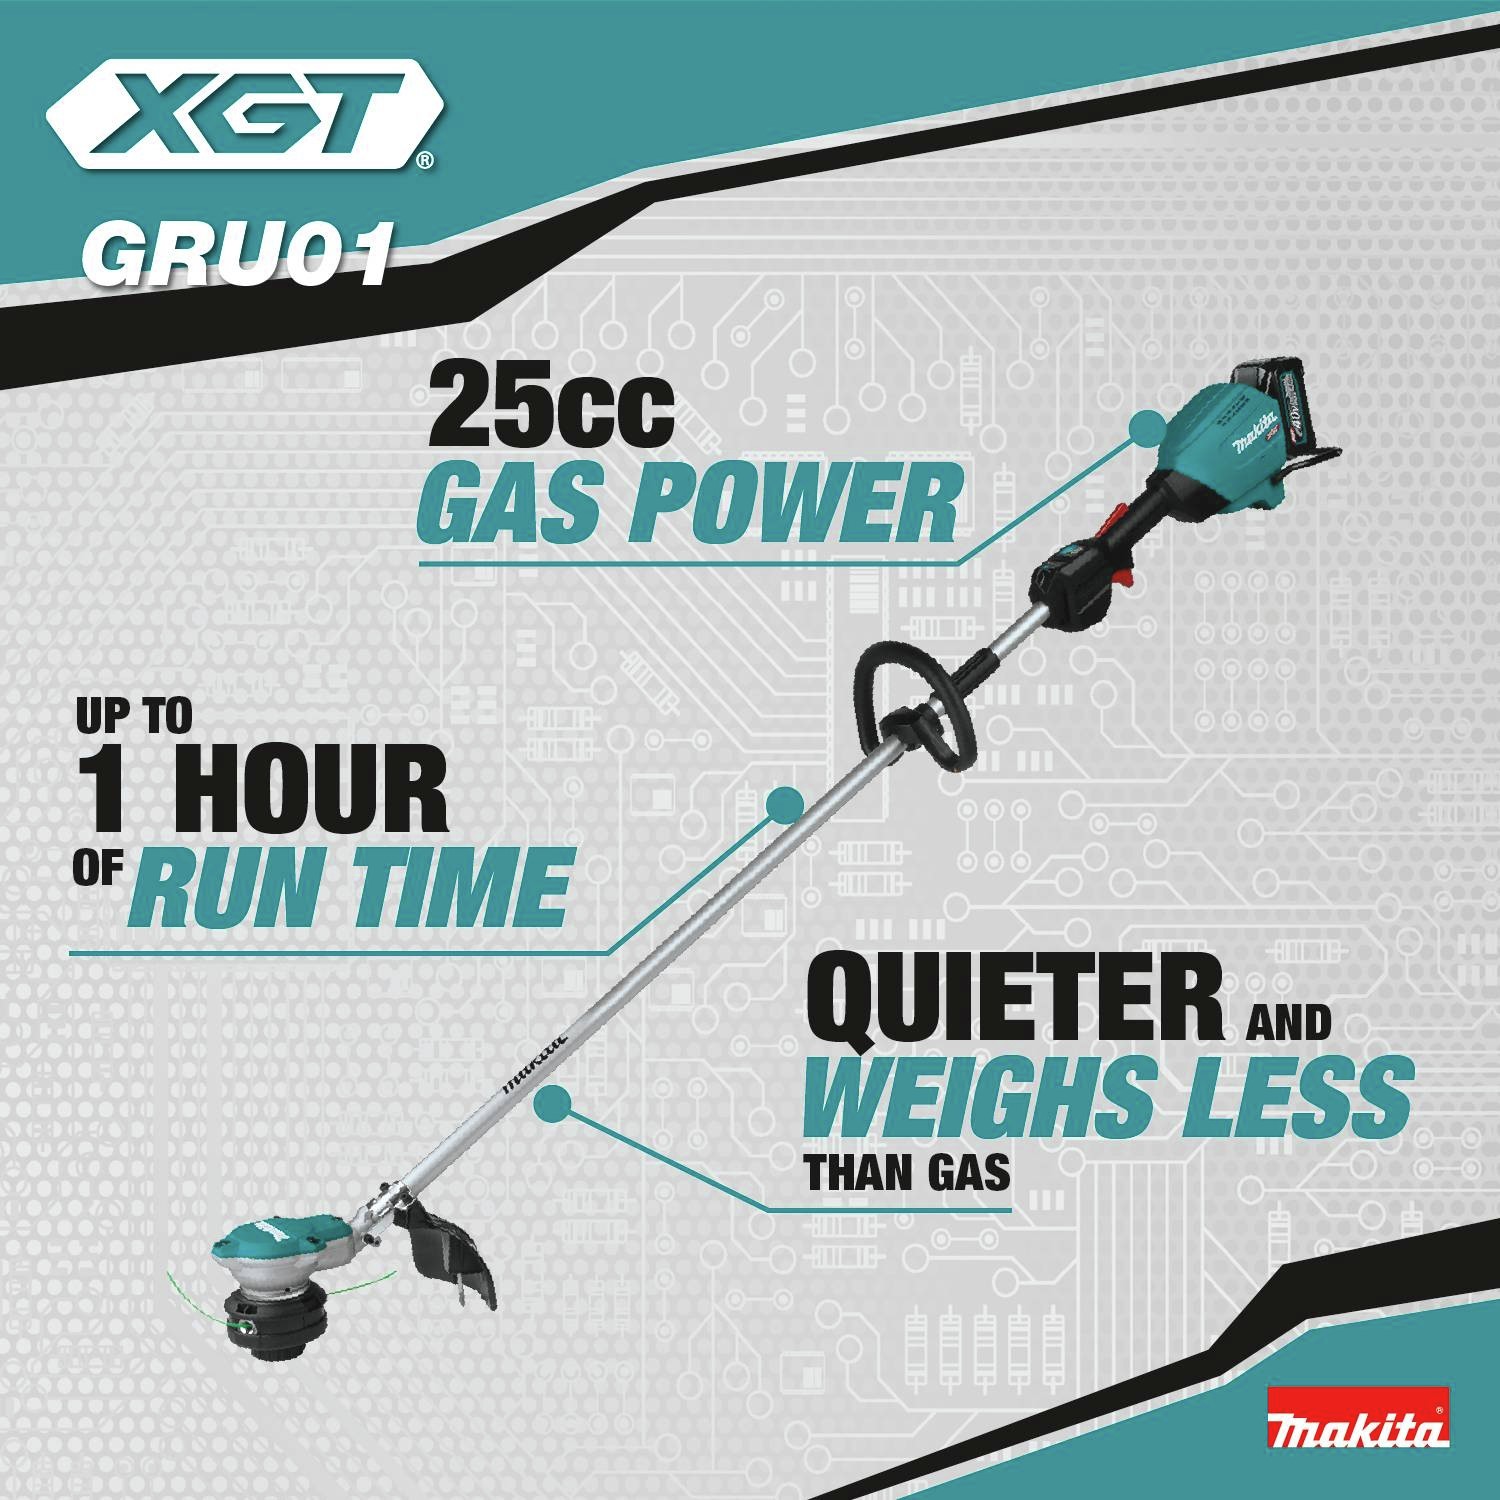 25cc gas power. Up to 1 hour of run time. Quieter and weighs less than gas